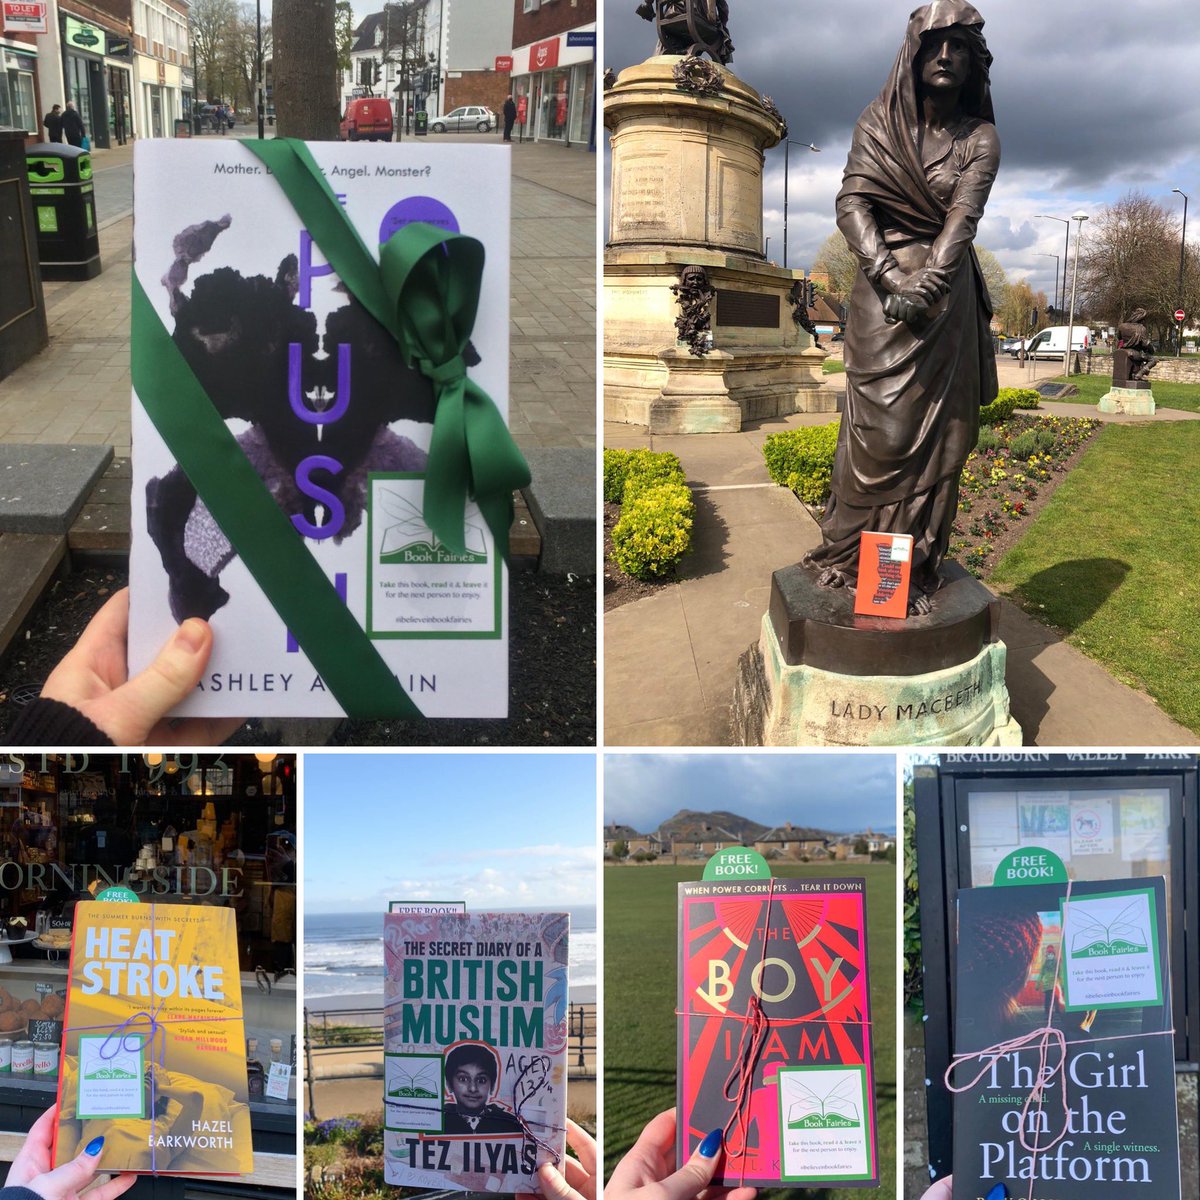 What a smashing day. Our first ever Debut Author Day #DebutBookFairies. Thank you to all the incredible authors and publishers who got involved and of course to all the book fairies! These are some pics from our UK activity 😁

#ibelieveinbookfairies